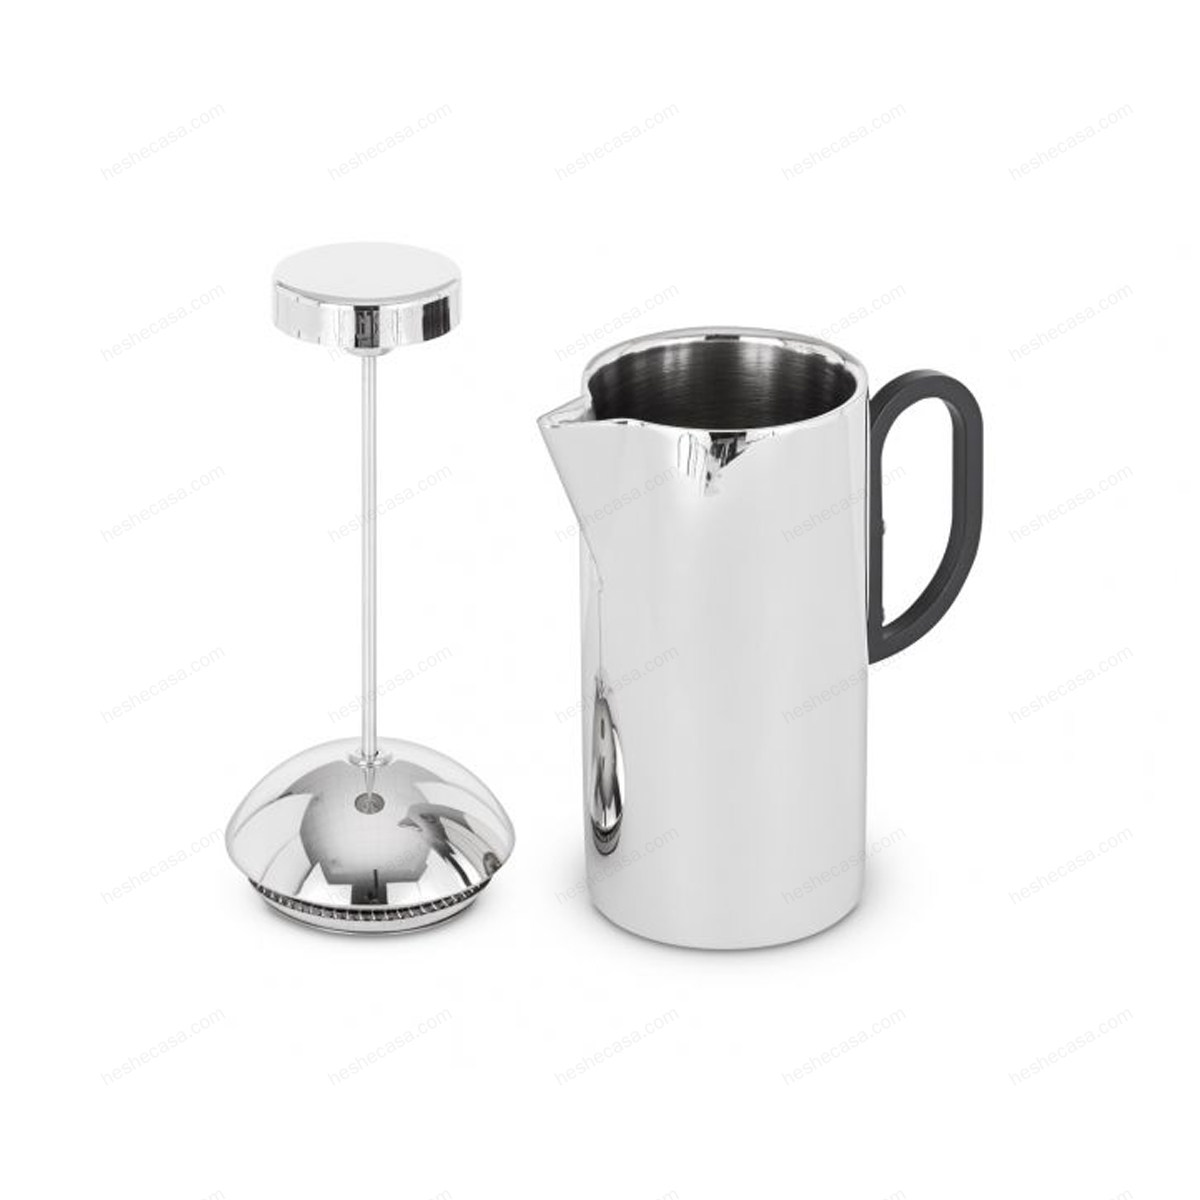 Brew Cafetiere 水壶